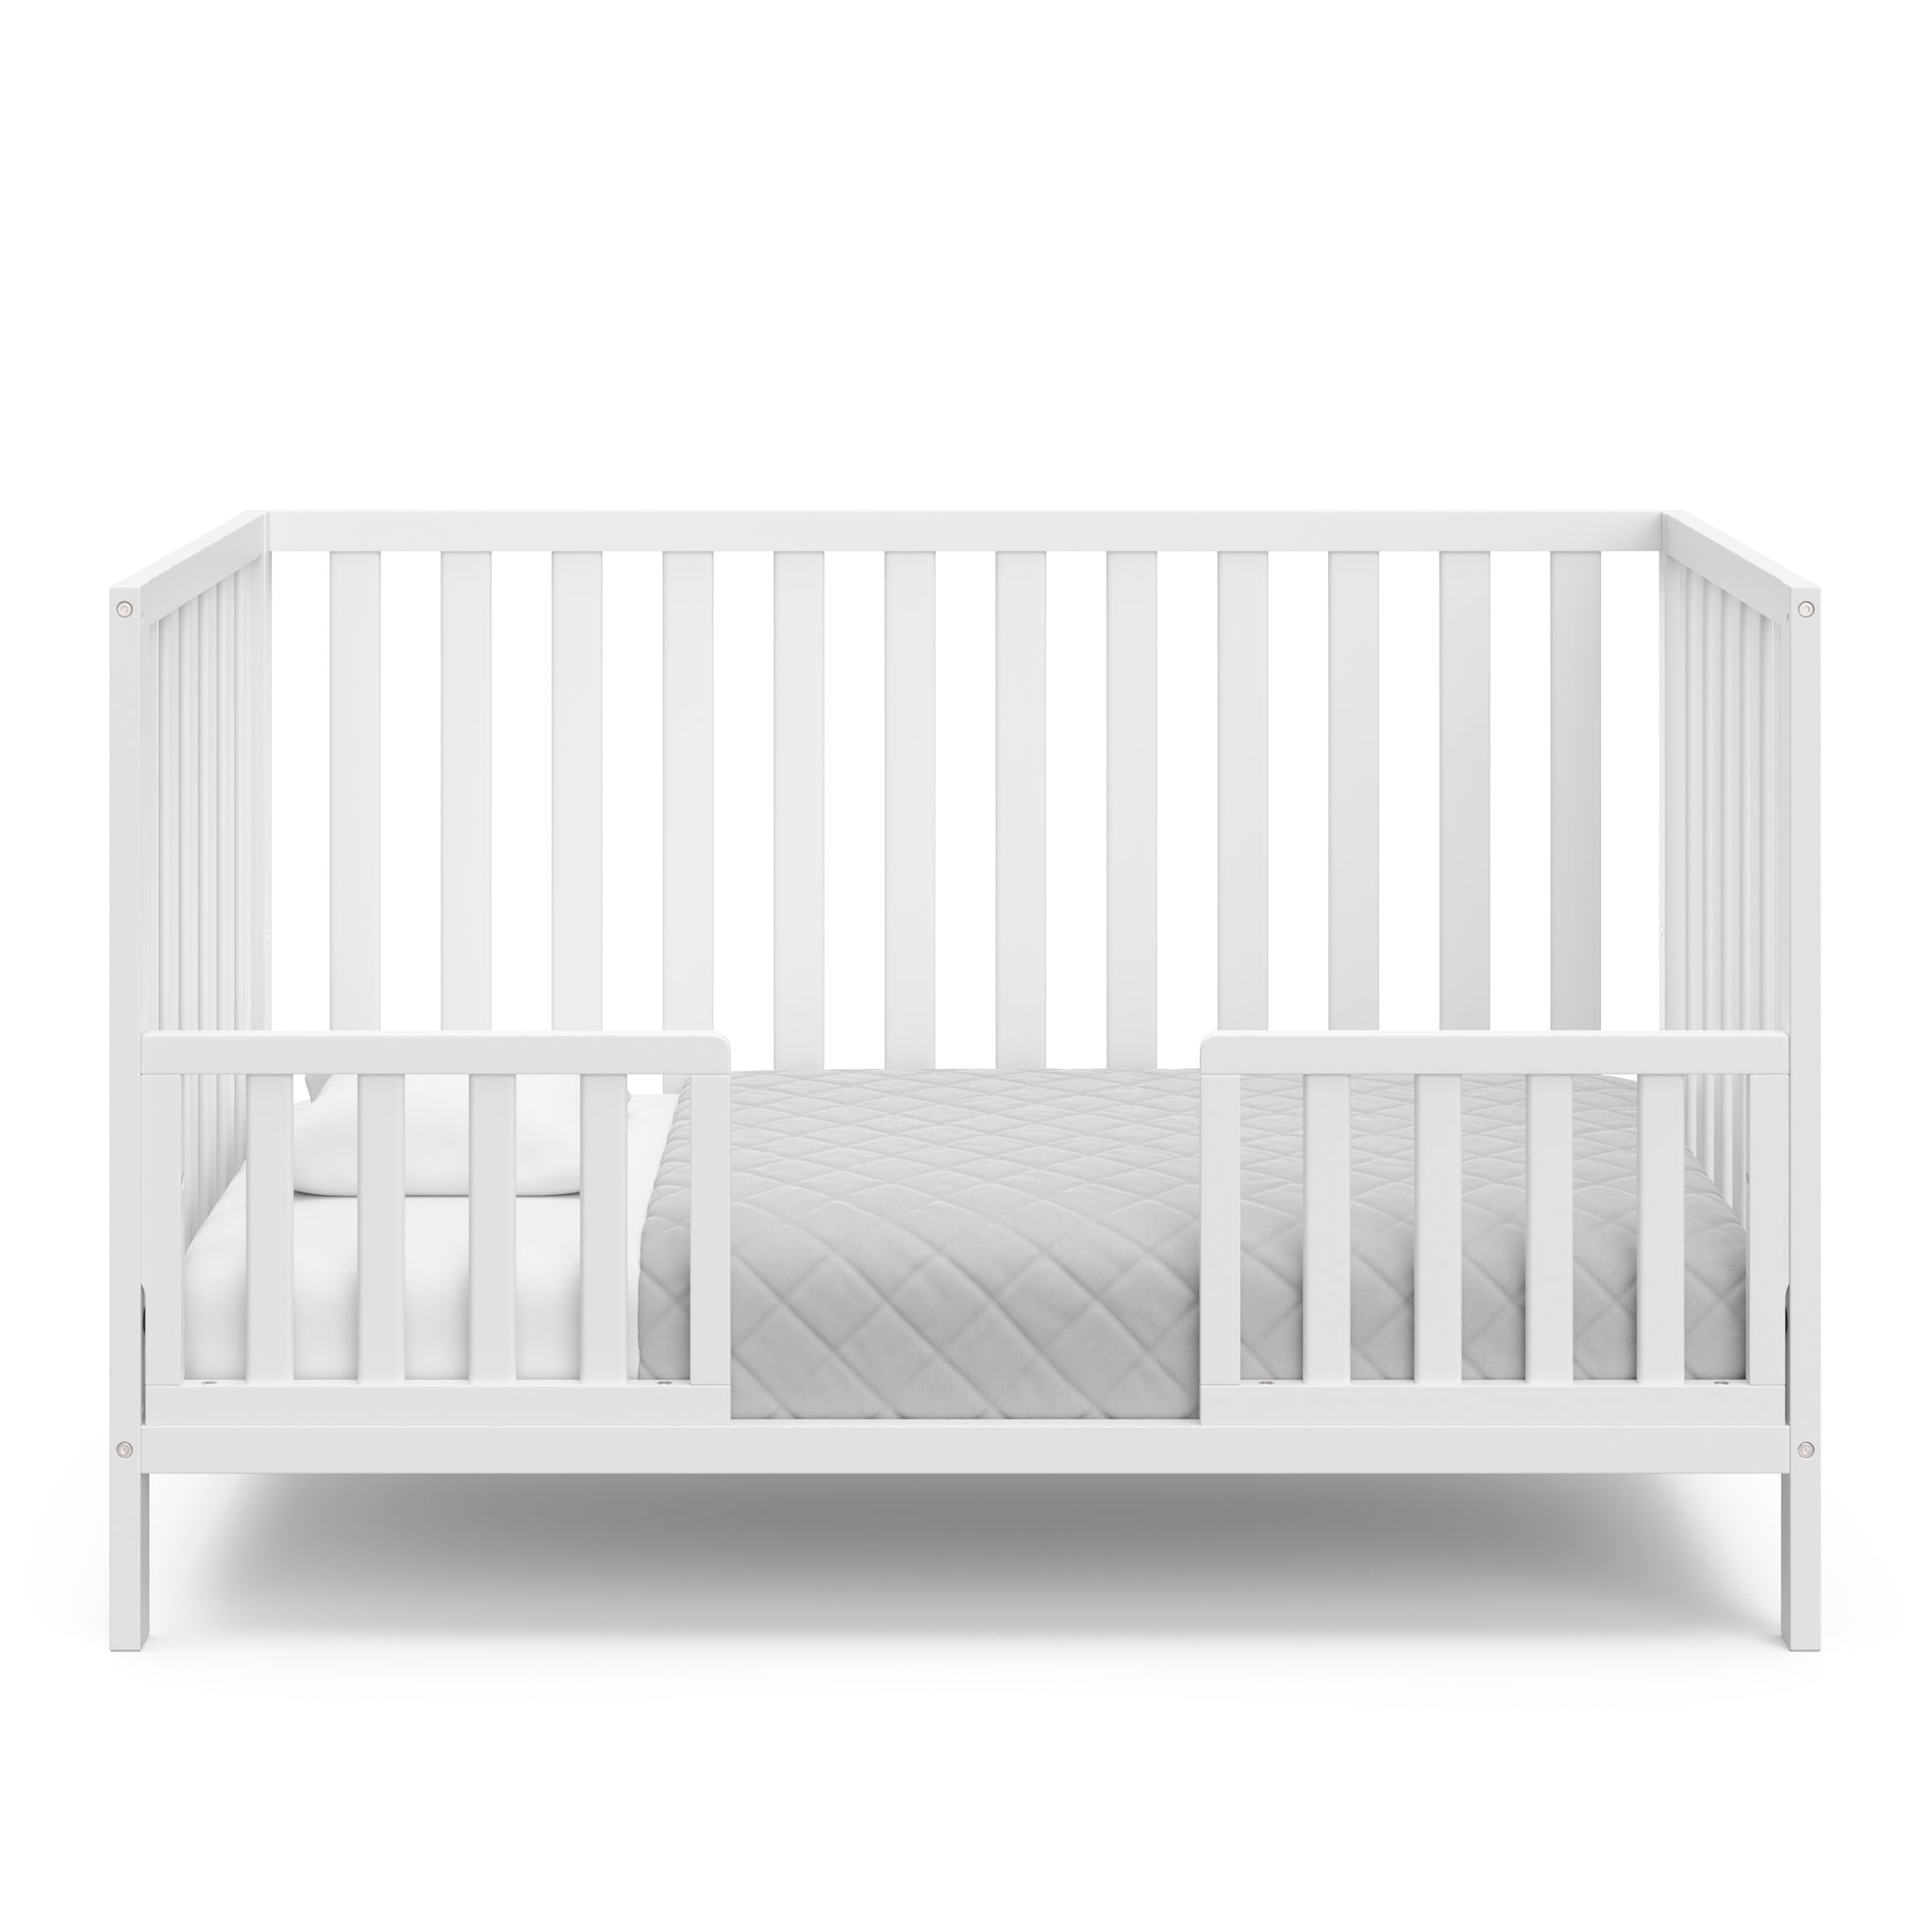 White crib in toddler bed conversion with two safety guardrails